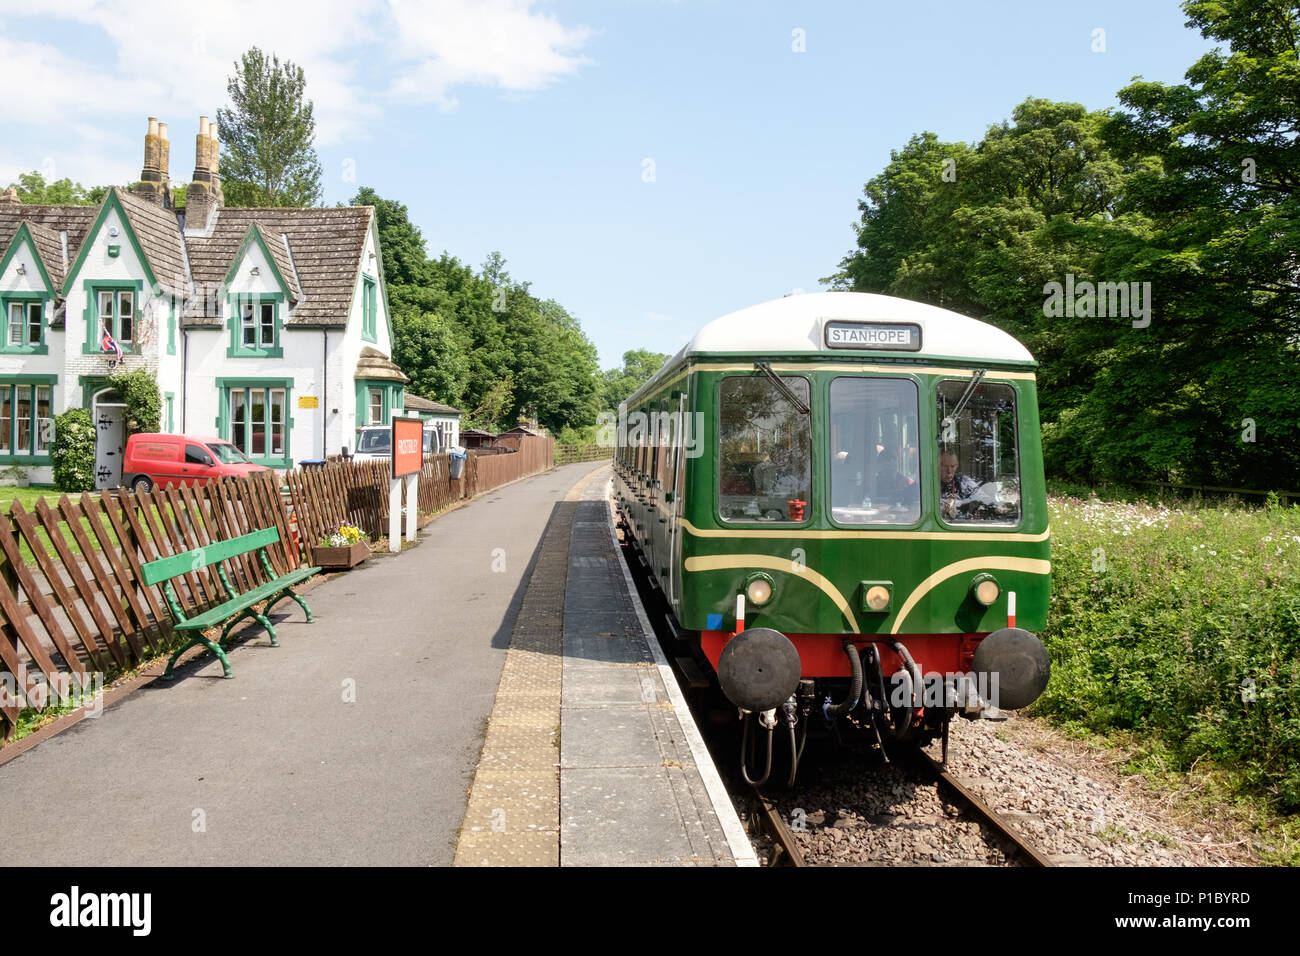 A train at the platform of Frosterley Station, on the Weardale Railway heritage branch line in County Durham, England, UK. Stock Photo